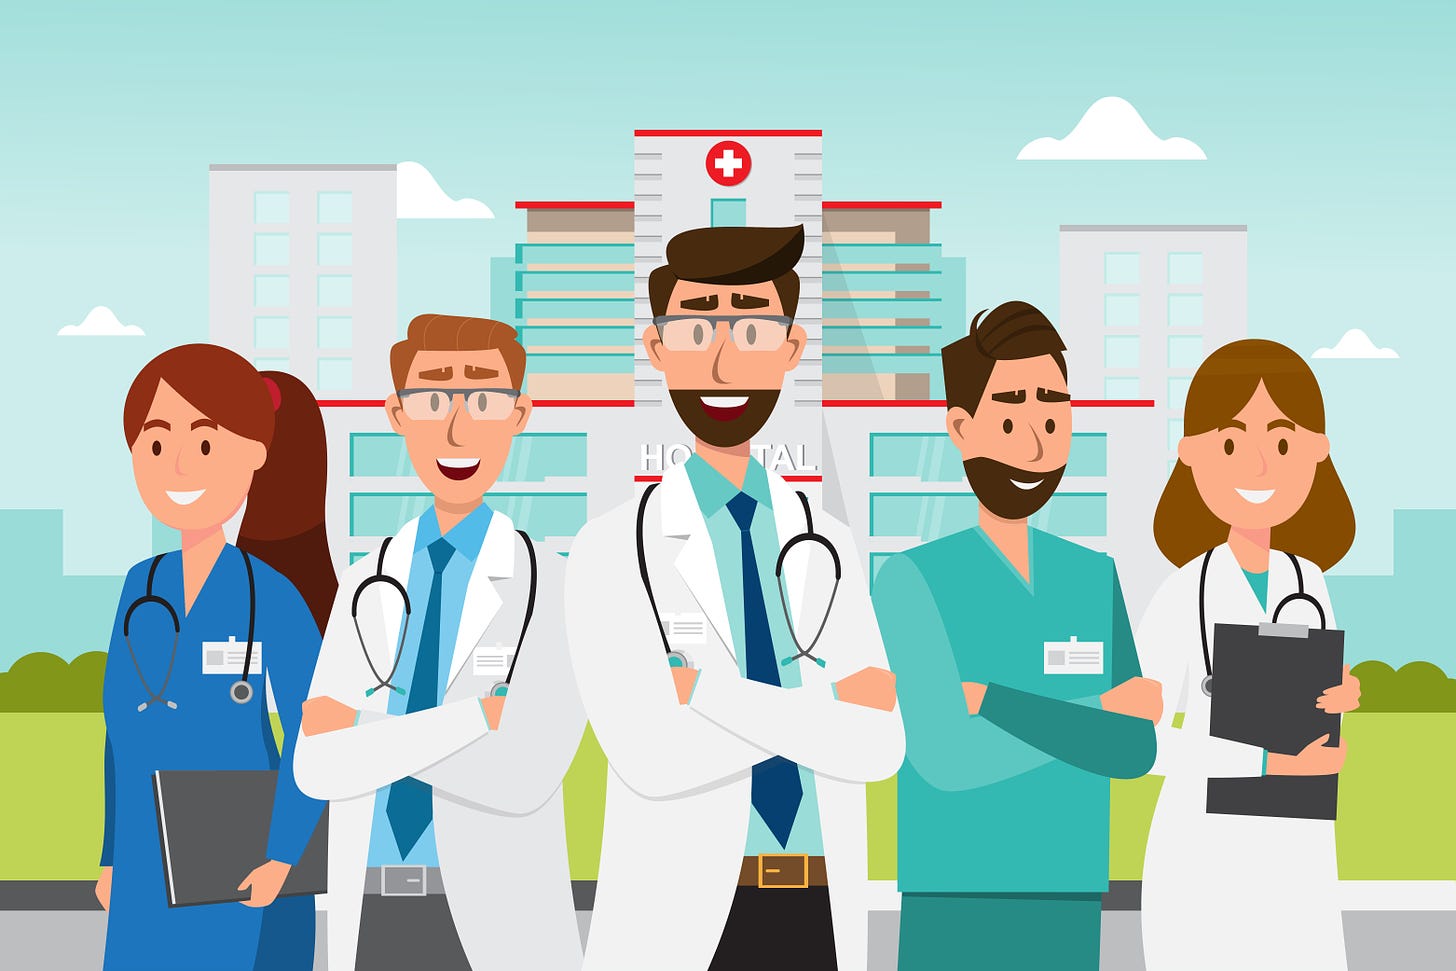 Set of doctor cartoon characters. Medical staff team concept in front ...